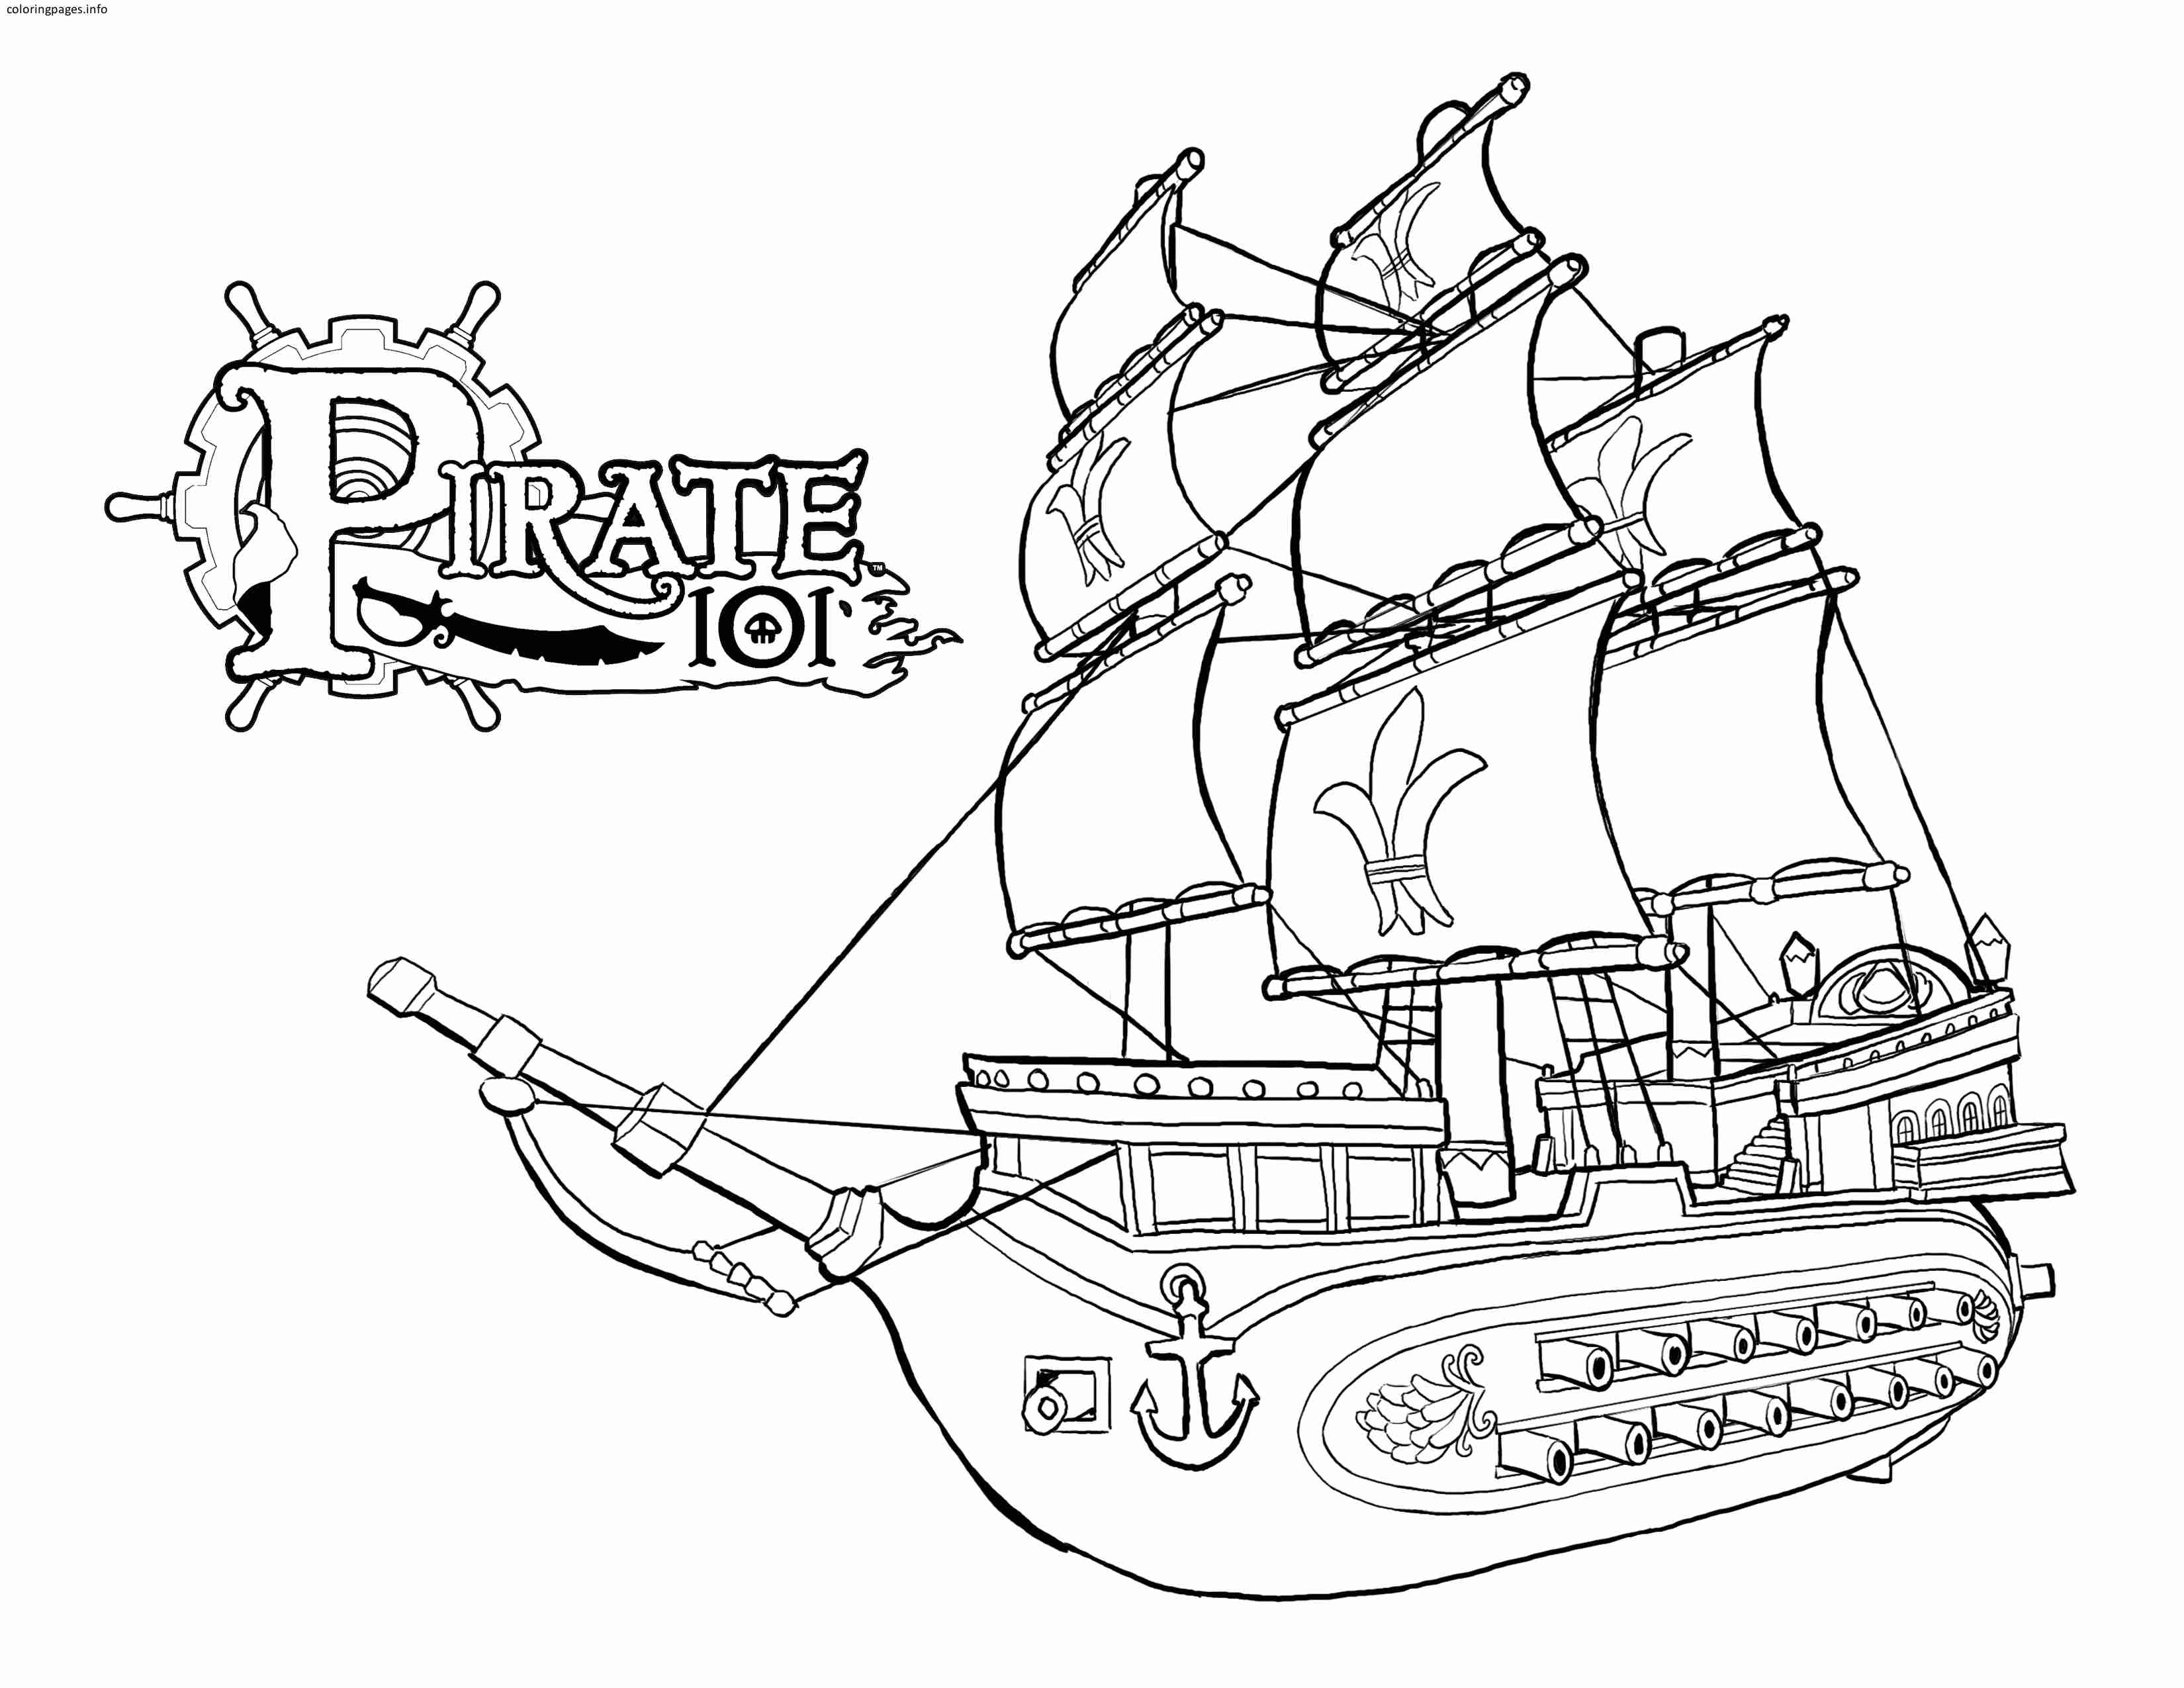 Lego Pirate Coloring Pages at GetColorings.com | Free printable